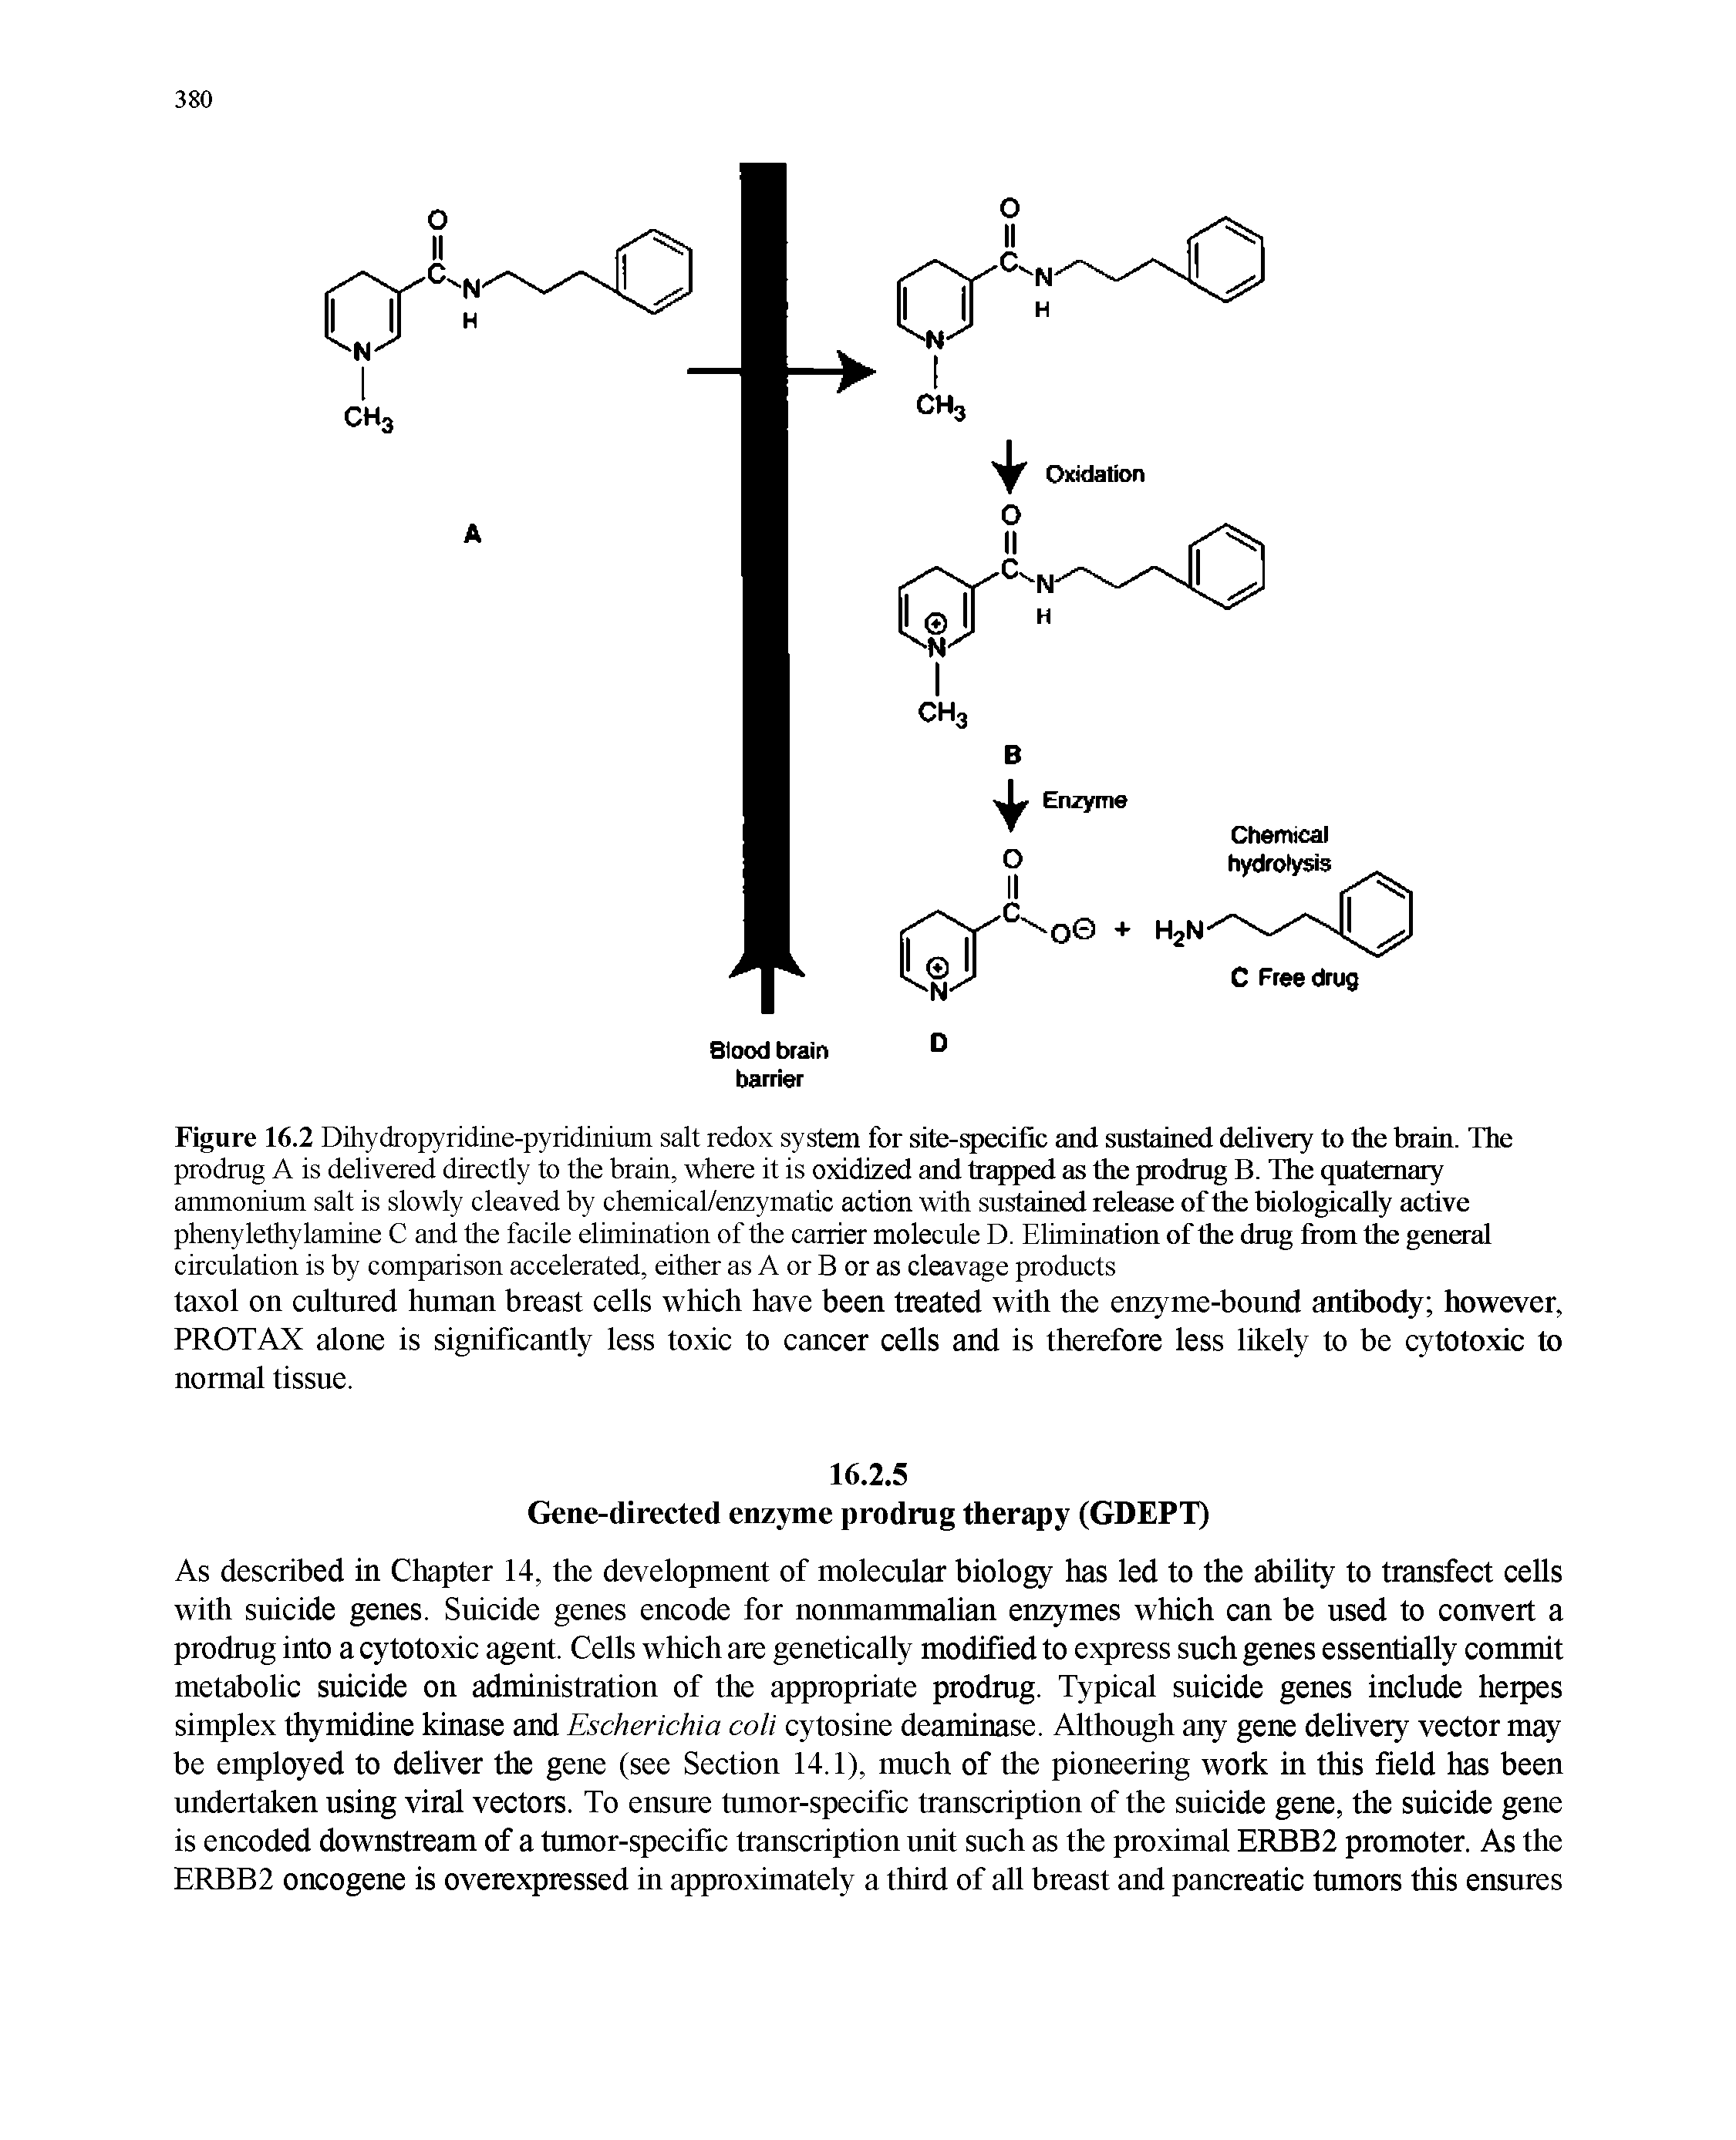 Figure 16.2 Dihydropyridine-pyridinium salt redox system for site-specific and sustained delivery to the brain. The prodrug A is delivered directly to the brain, where it is oxidized and trapped as the prodrug B. The quaternary ammonium salt is slowly cleaved by chemical/enzymatic action with sustained release of the biologically active phenylethylamine C and the facile elimination of the carrier molecule D. Elimination of the drug from the general circulation is by comparison accelerated, either as A or B or as cleavage products...